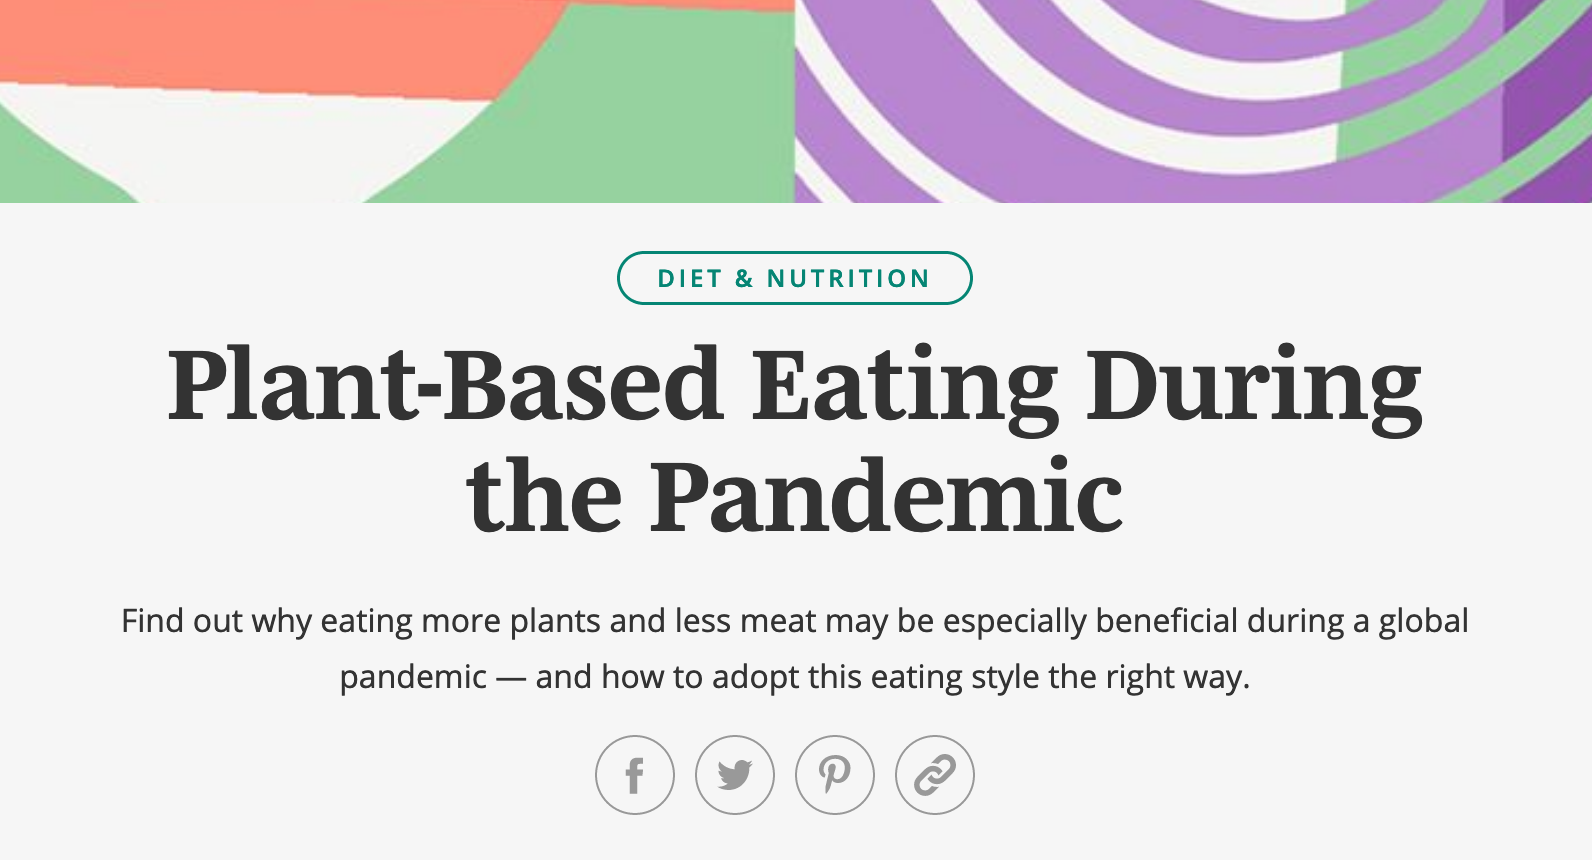 Plant-Based Eating During the Pandemic